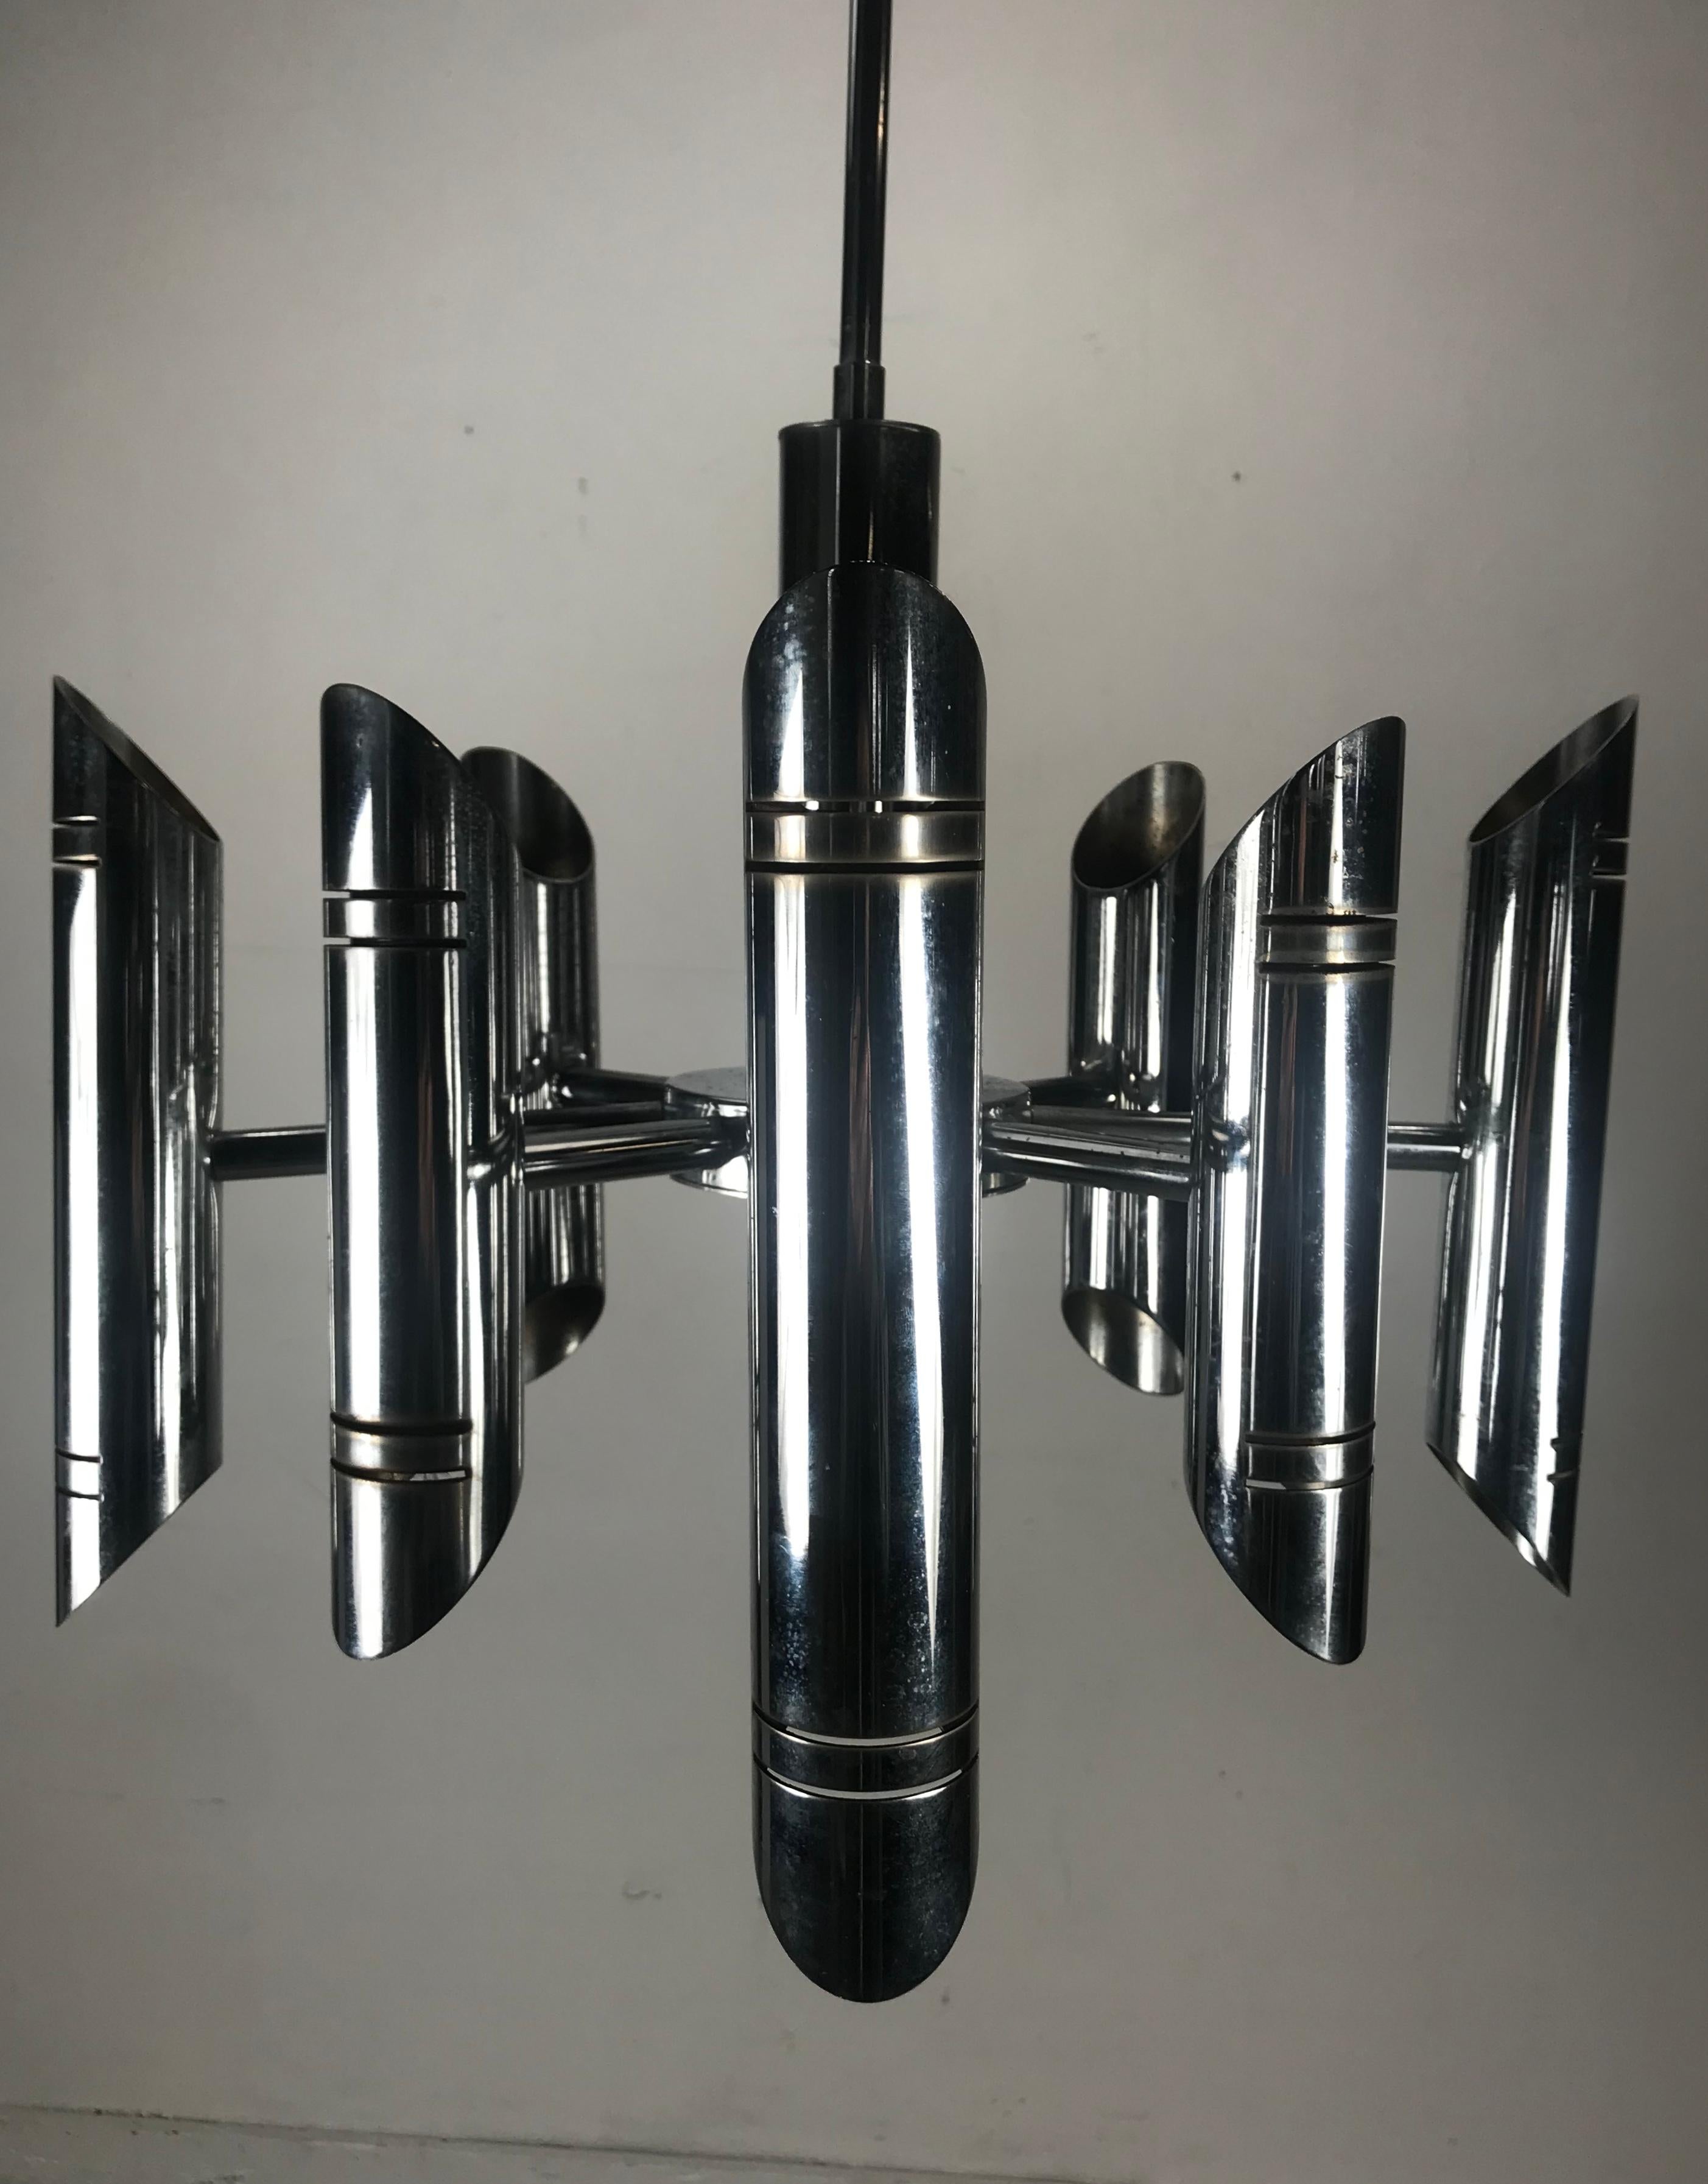 Classic 8 arm, 16 bulb Italian modern chrome chandelier by Gaetano Sciolari..Amazing design, arms can be adjusted in multi-position. As desired. Presently 39 inch drop, Perfect addition to any sleek, simple, elegant environment.